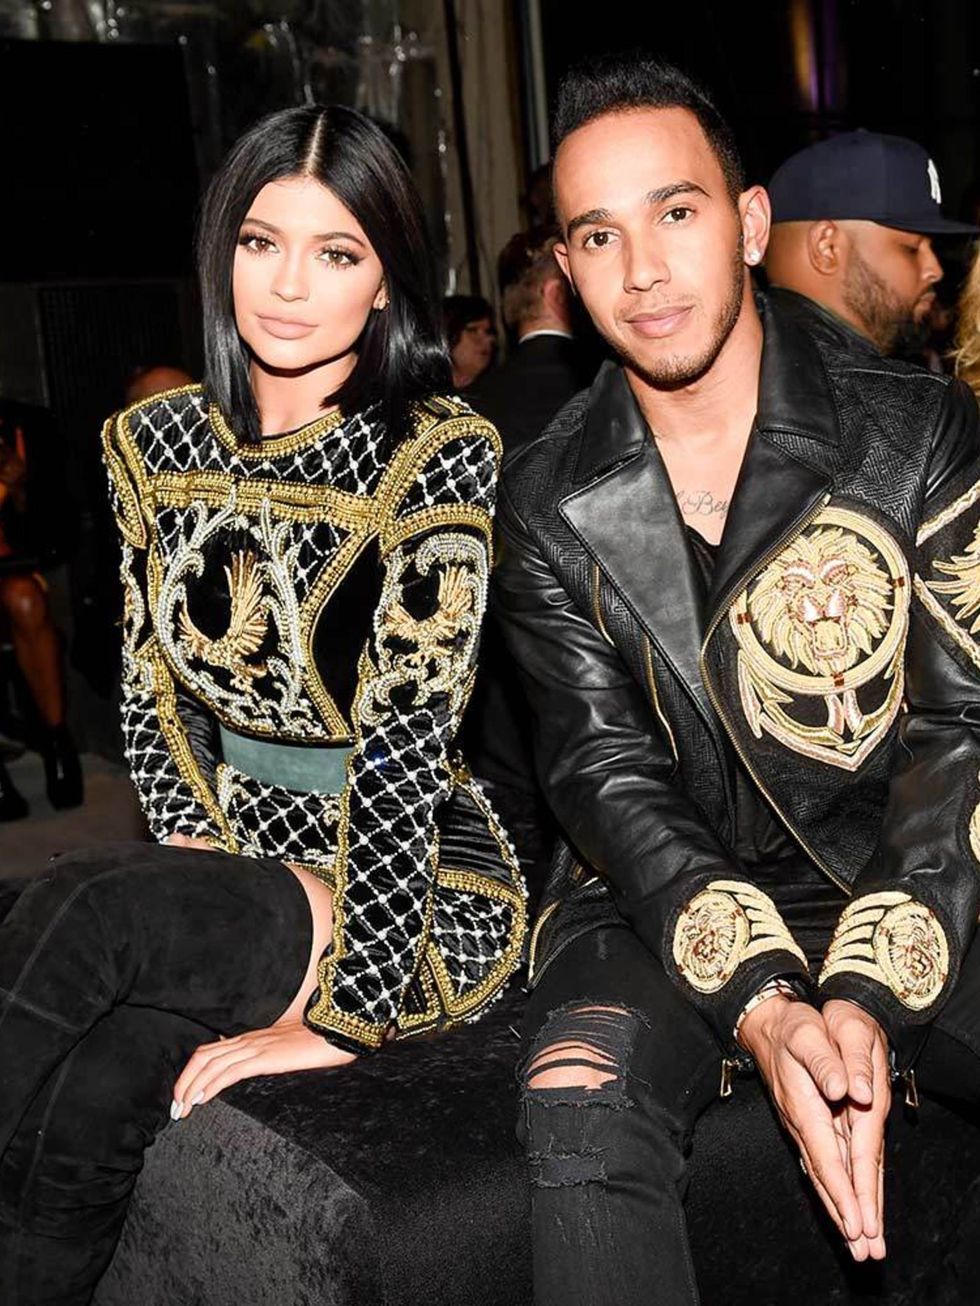 Kylie jenner and Lewis Hamilton on the front row at the H&M x Balmain show in New york, October 2015.